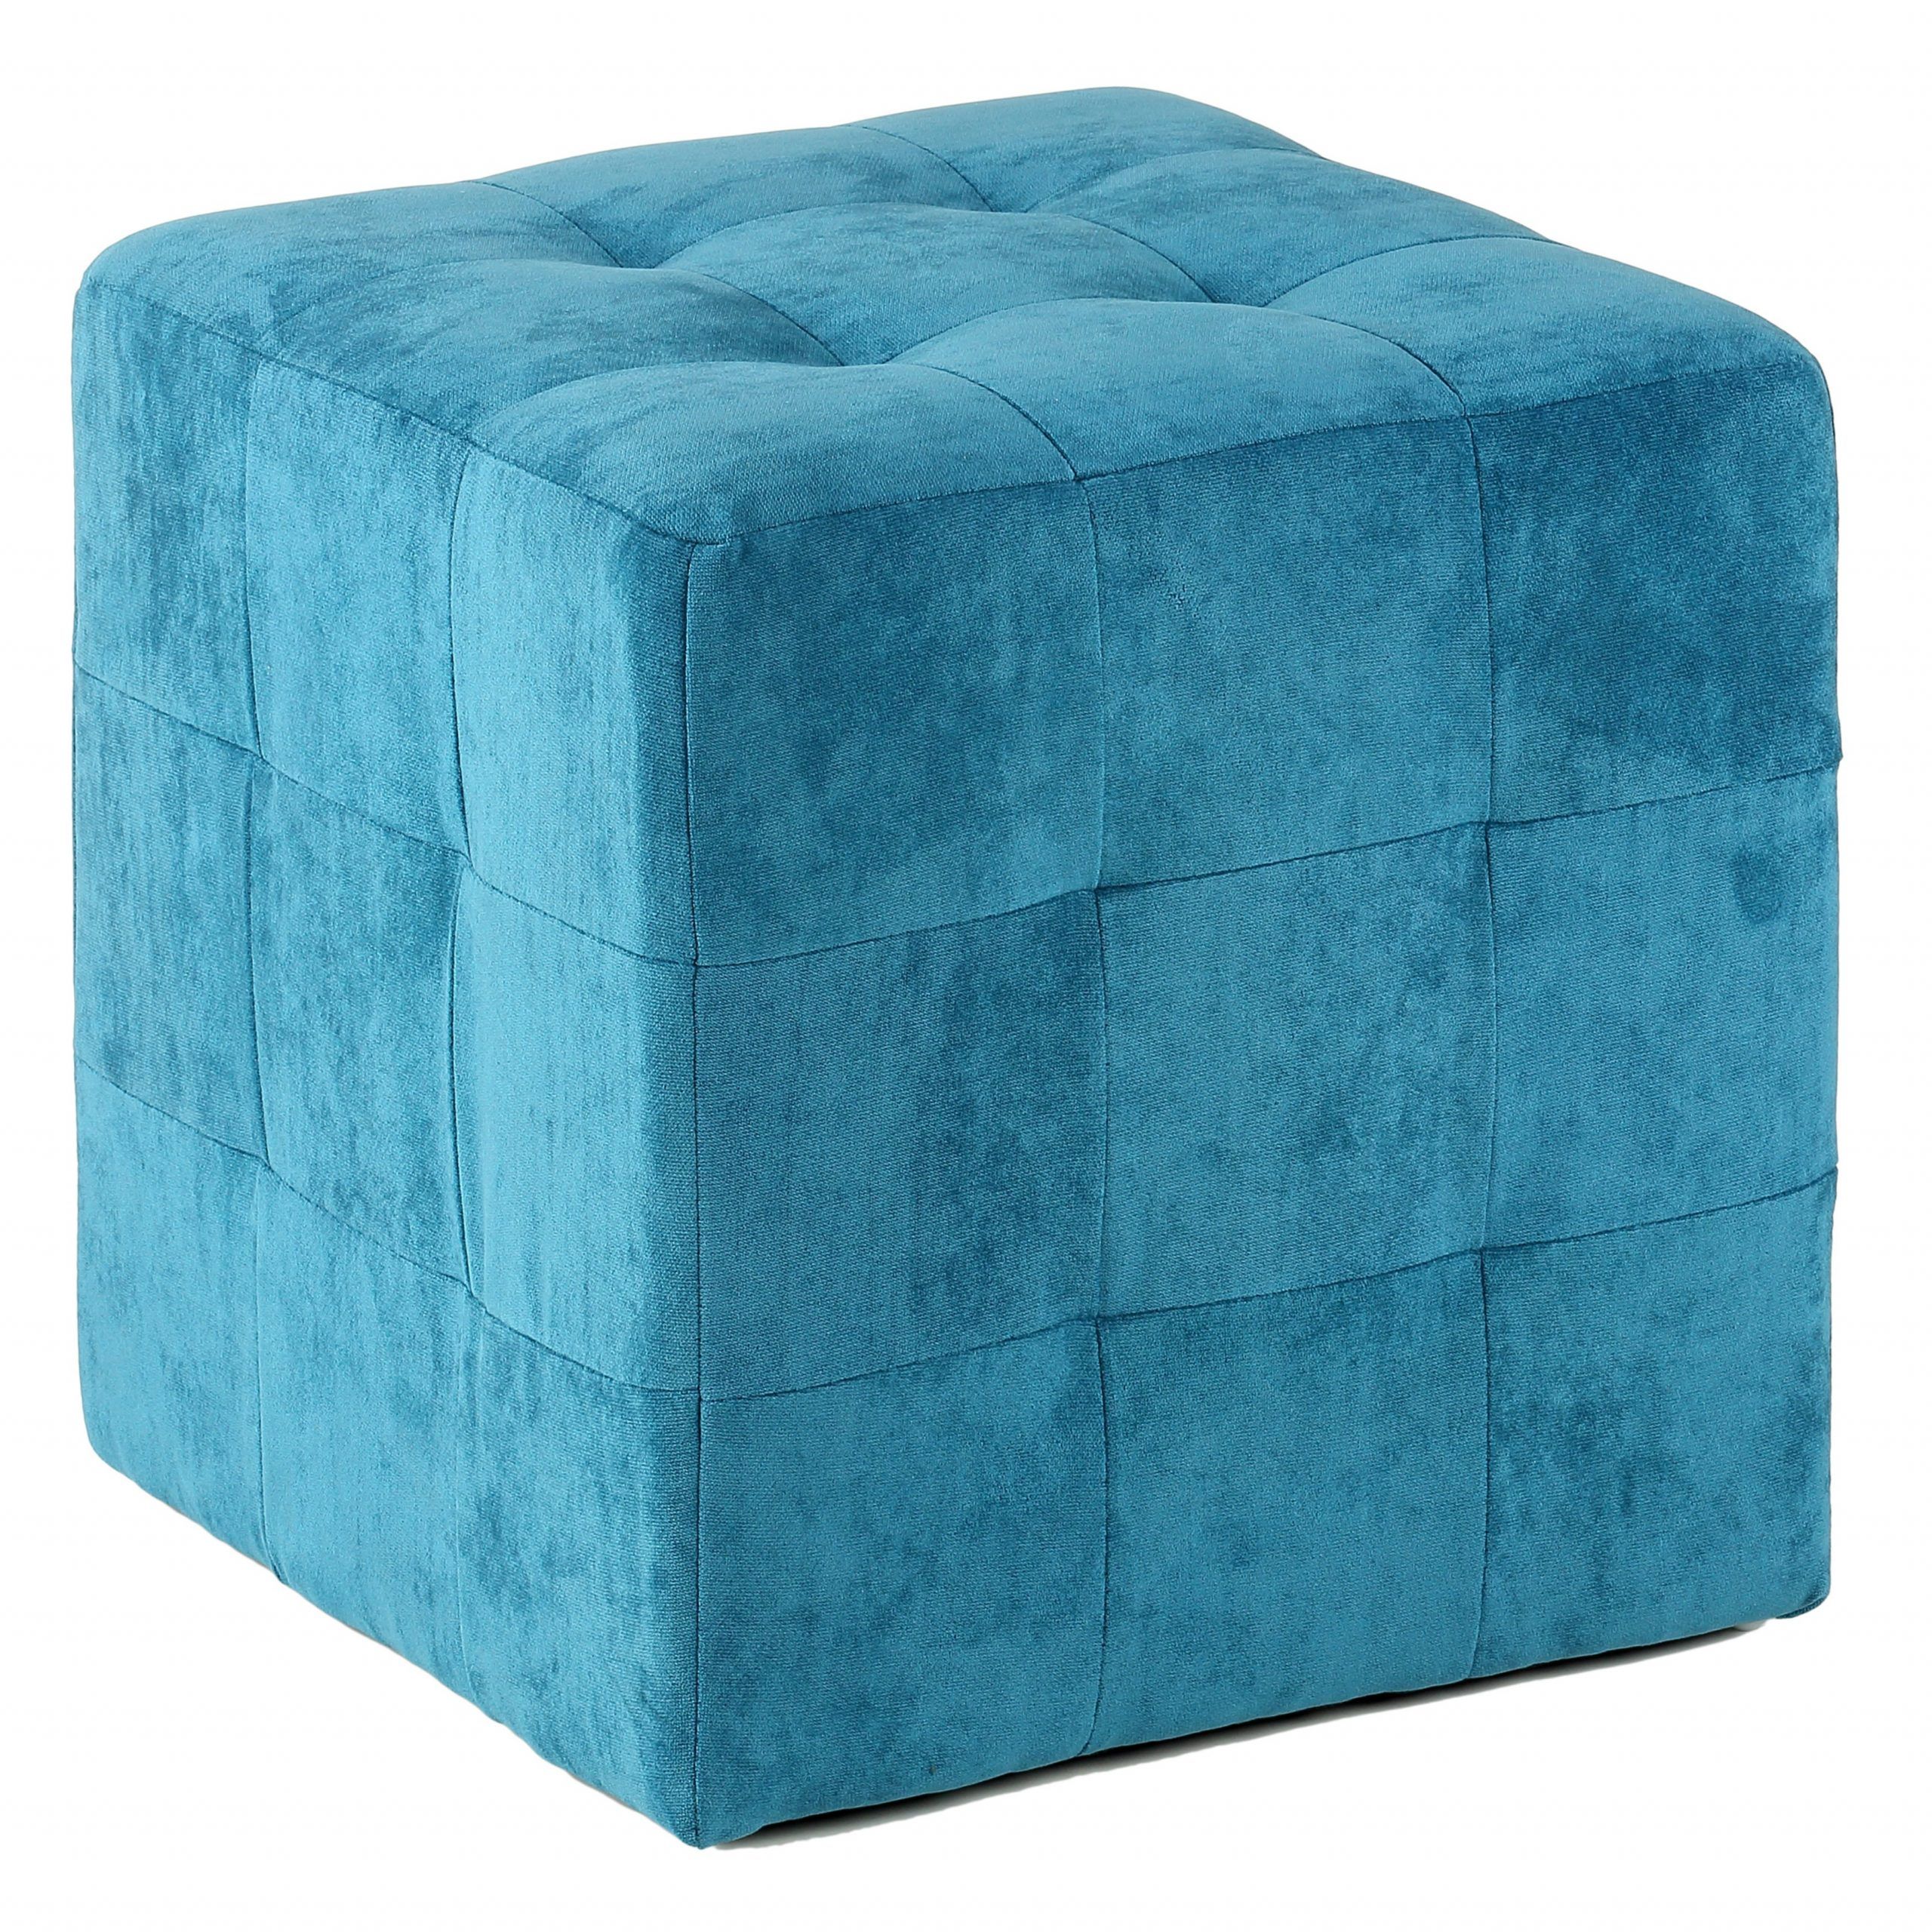 Shop Cortesi Home Blue Fabric Upholstered Cube Ottoman – Free Shipping Intended For Blue Fabric Tufted Surfboard Ottomans (View 9 of 20)